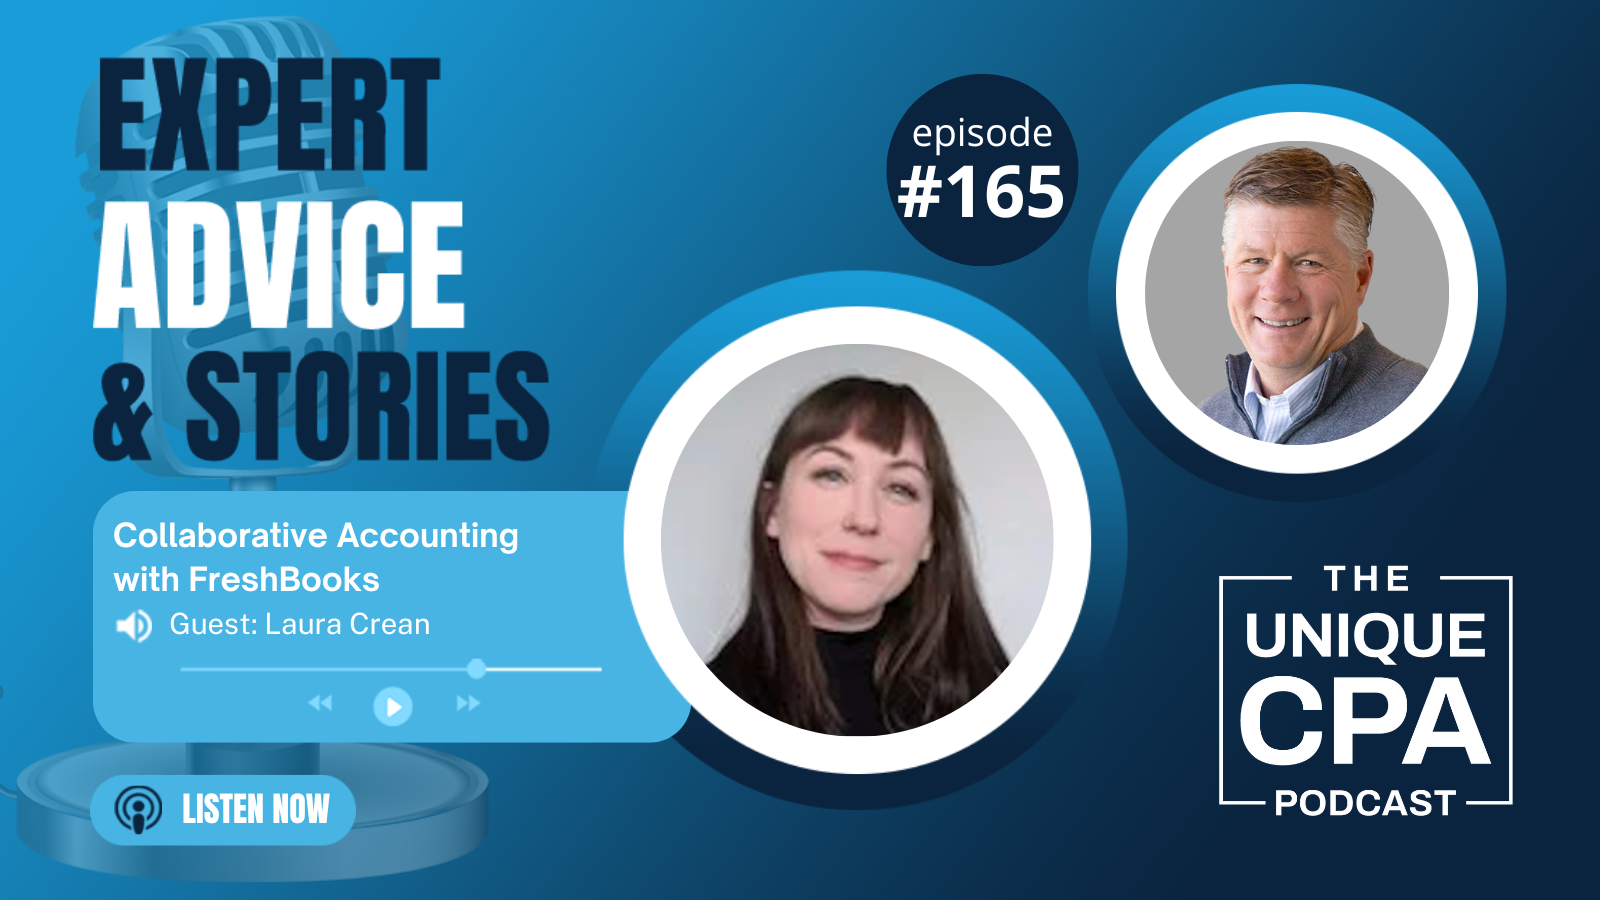 Unique Cpa Featured Image Ep 165 Laura Crean - Collaborative Accounting With Freshbooks - Tri-Merit